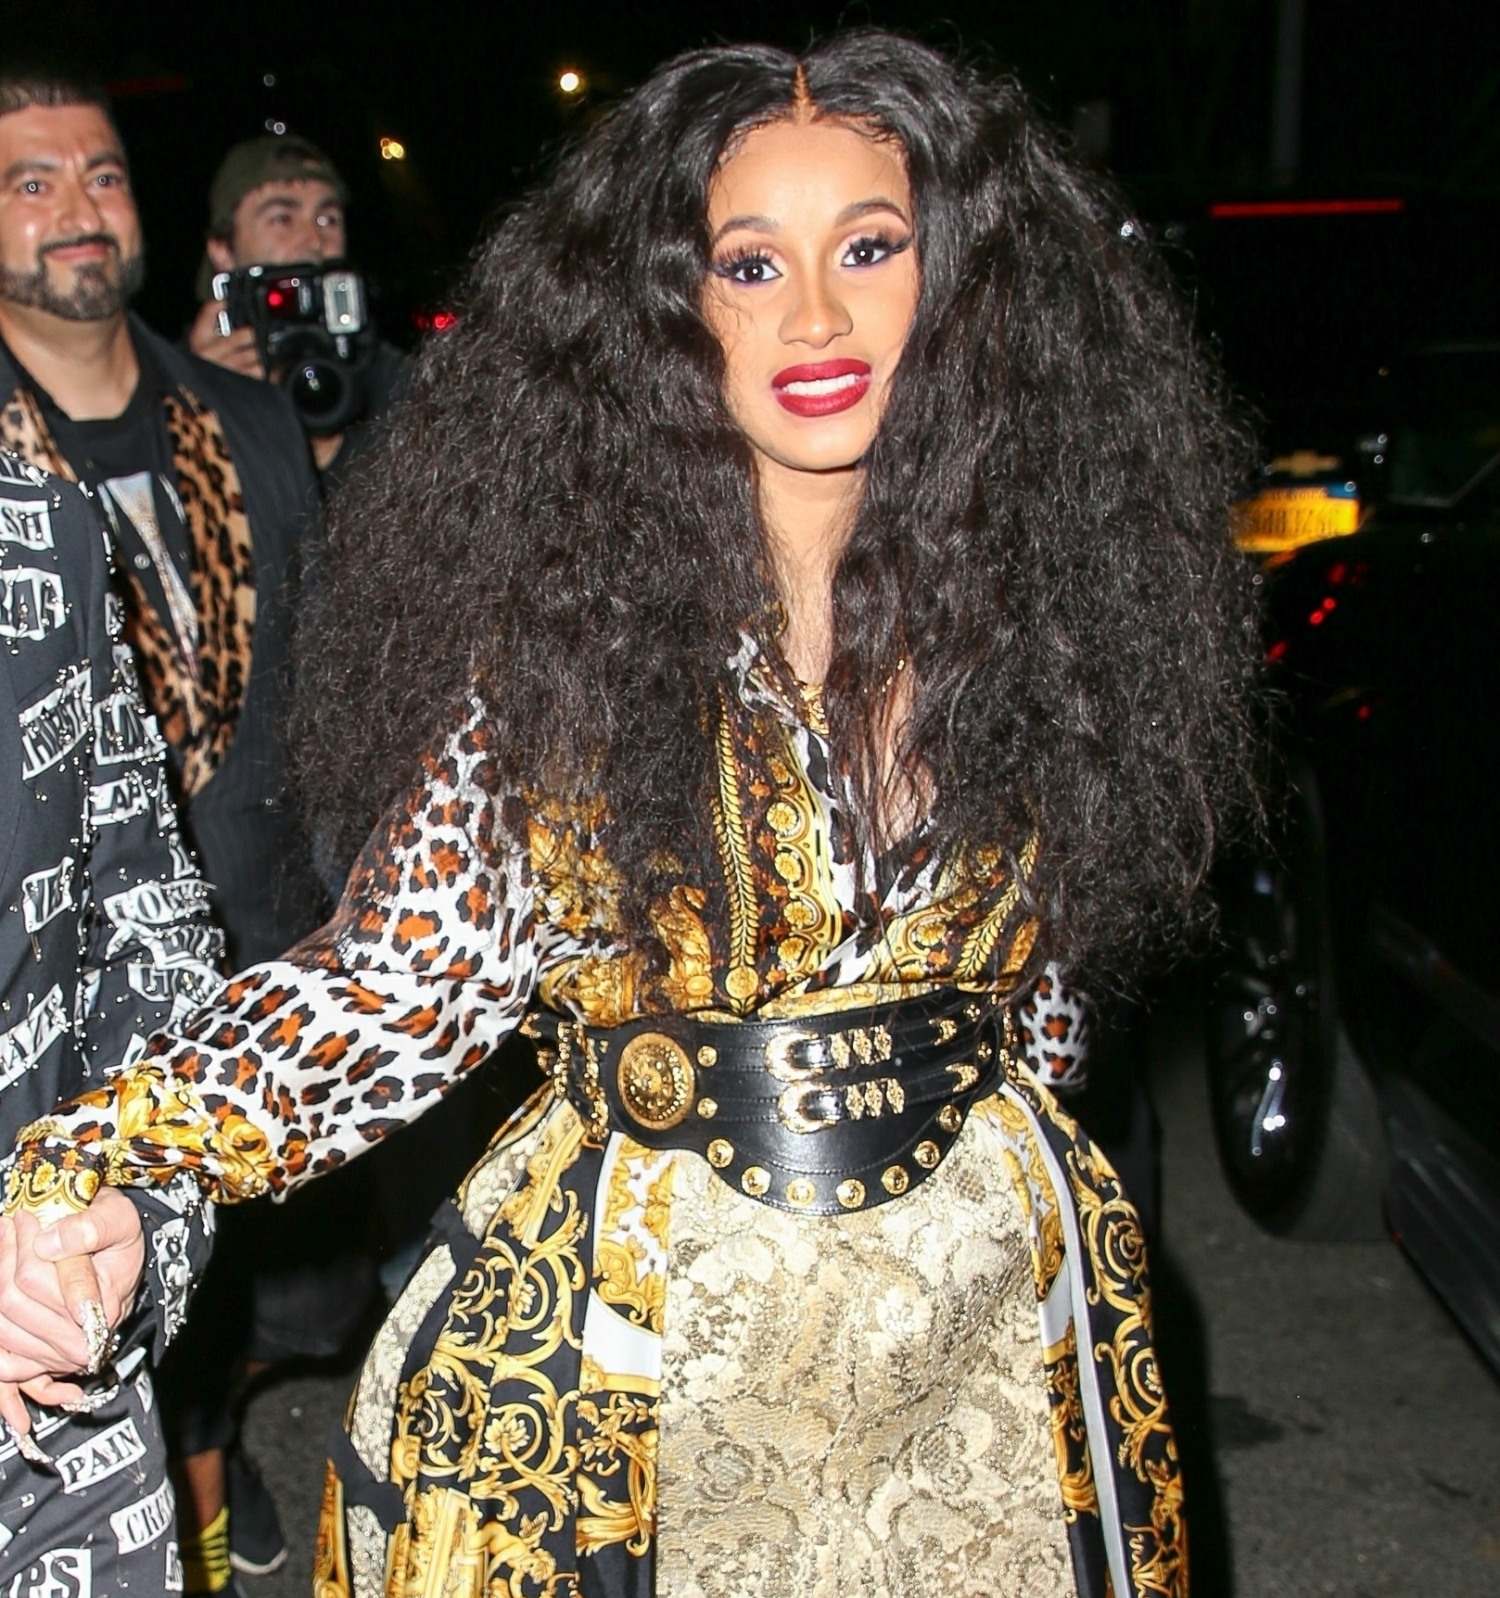 Cardi B and more stars are seen at the Met Gala after party